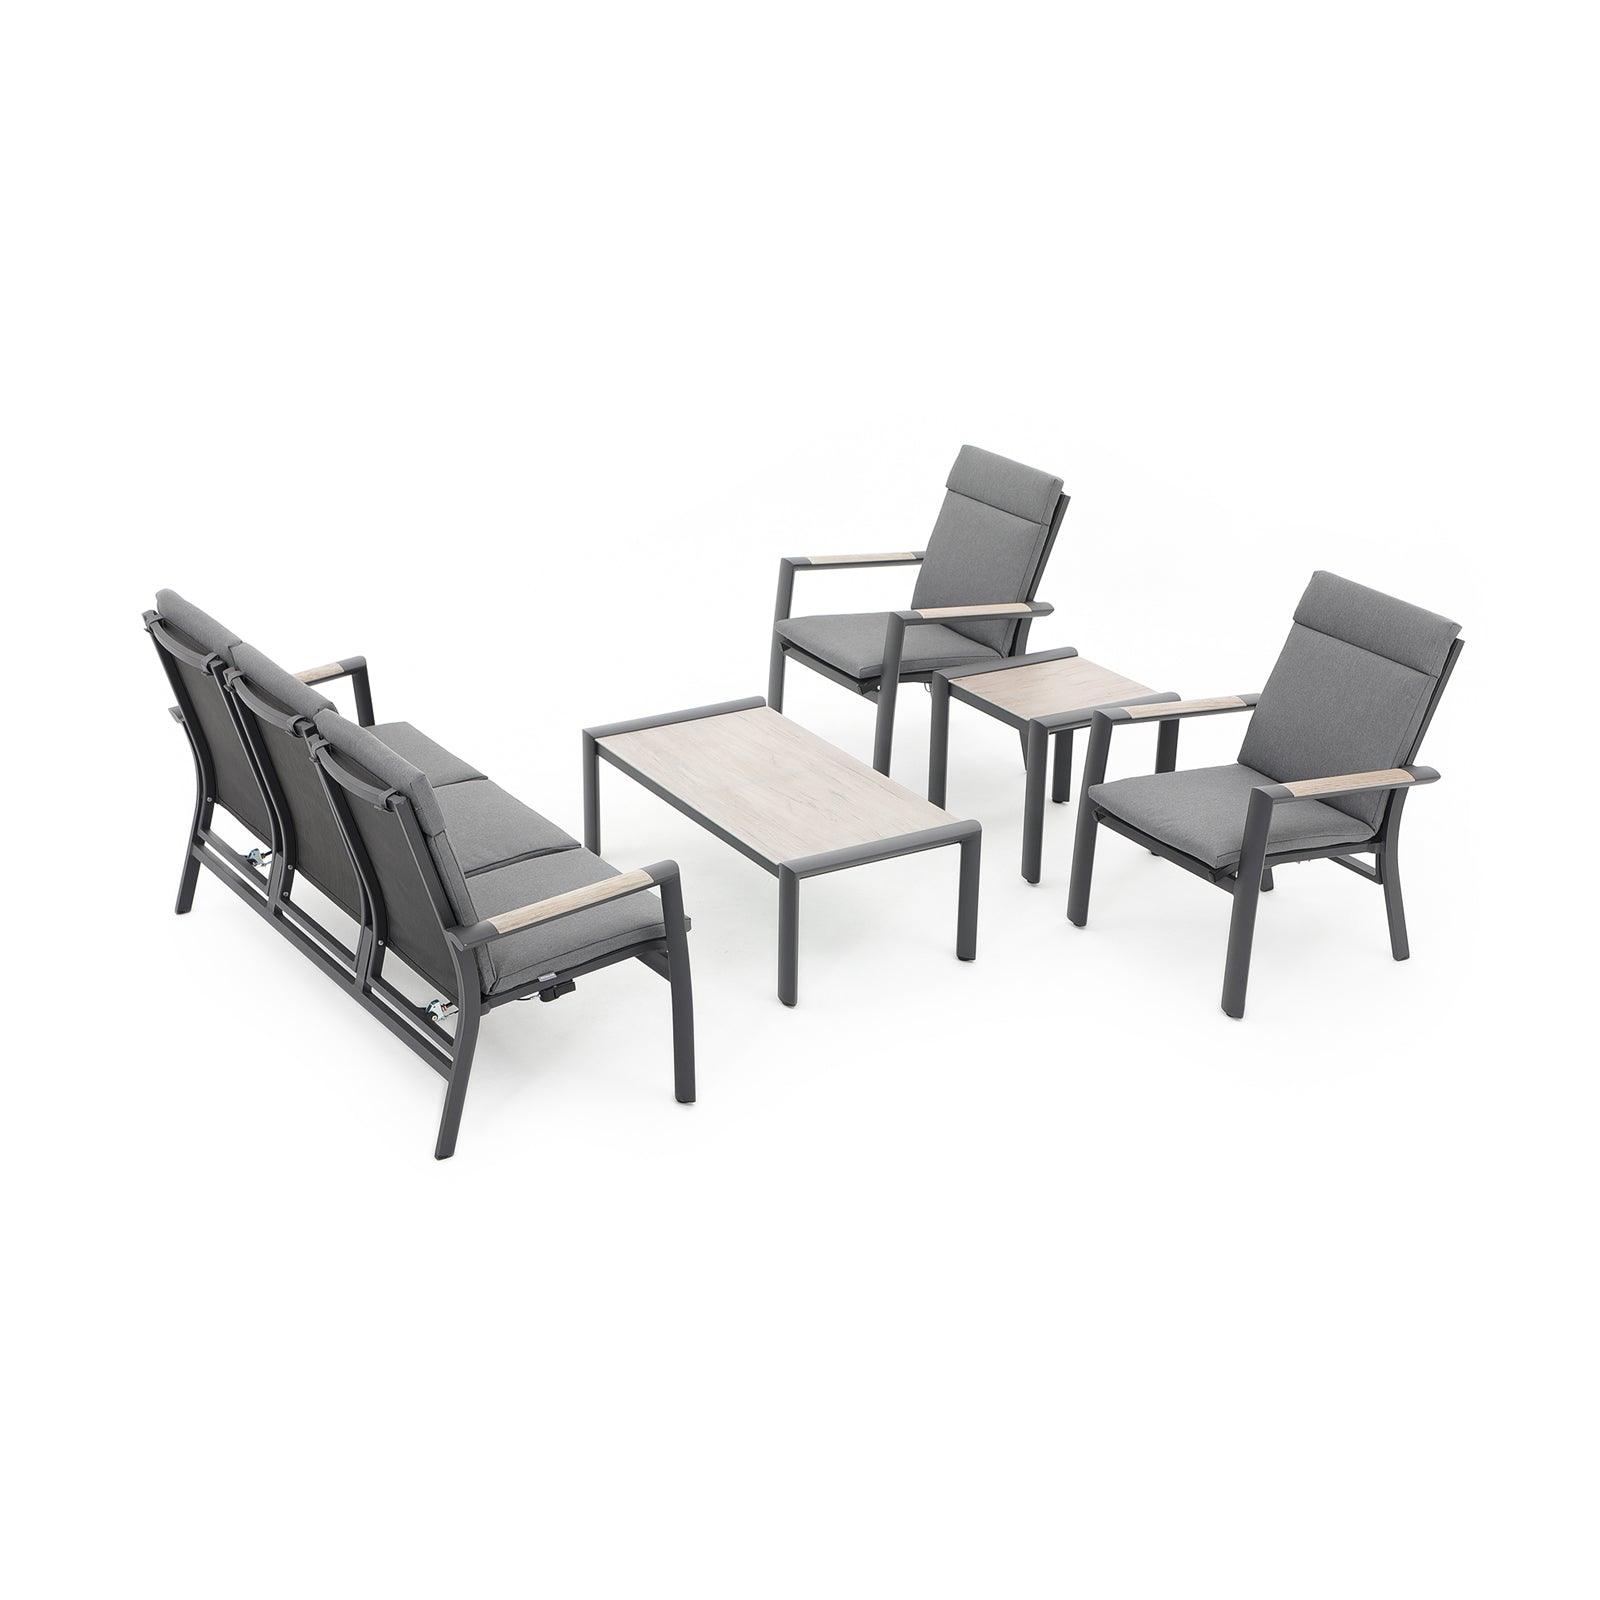 Capri 5-Piece grey aluminum outdoor conversation set with grey cushions, 1 three-seater sofa with adjustable backrest, 2 armchairs with adjustable backrest, 1 rectangle coffee table, 1 square side table - Jardina Furniture